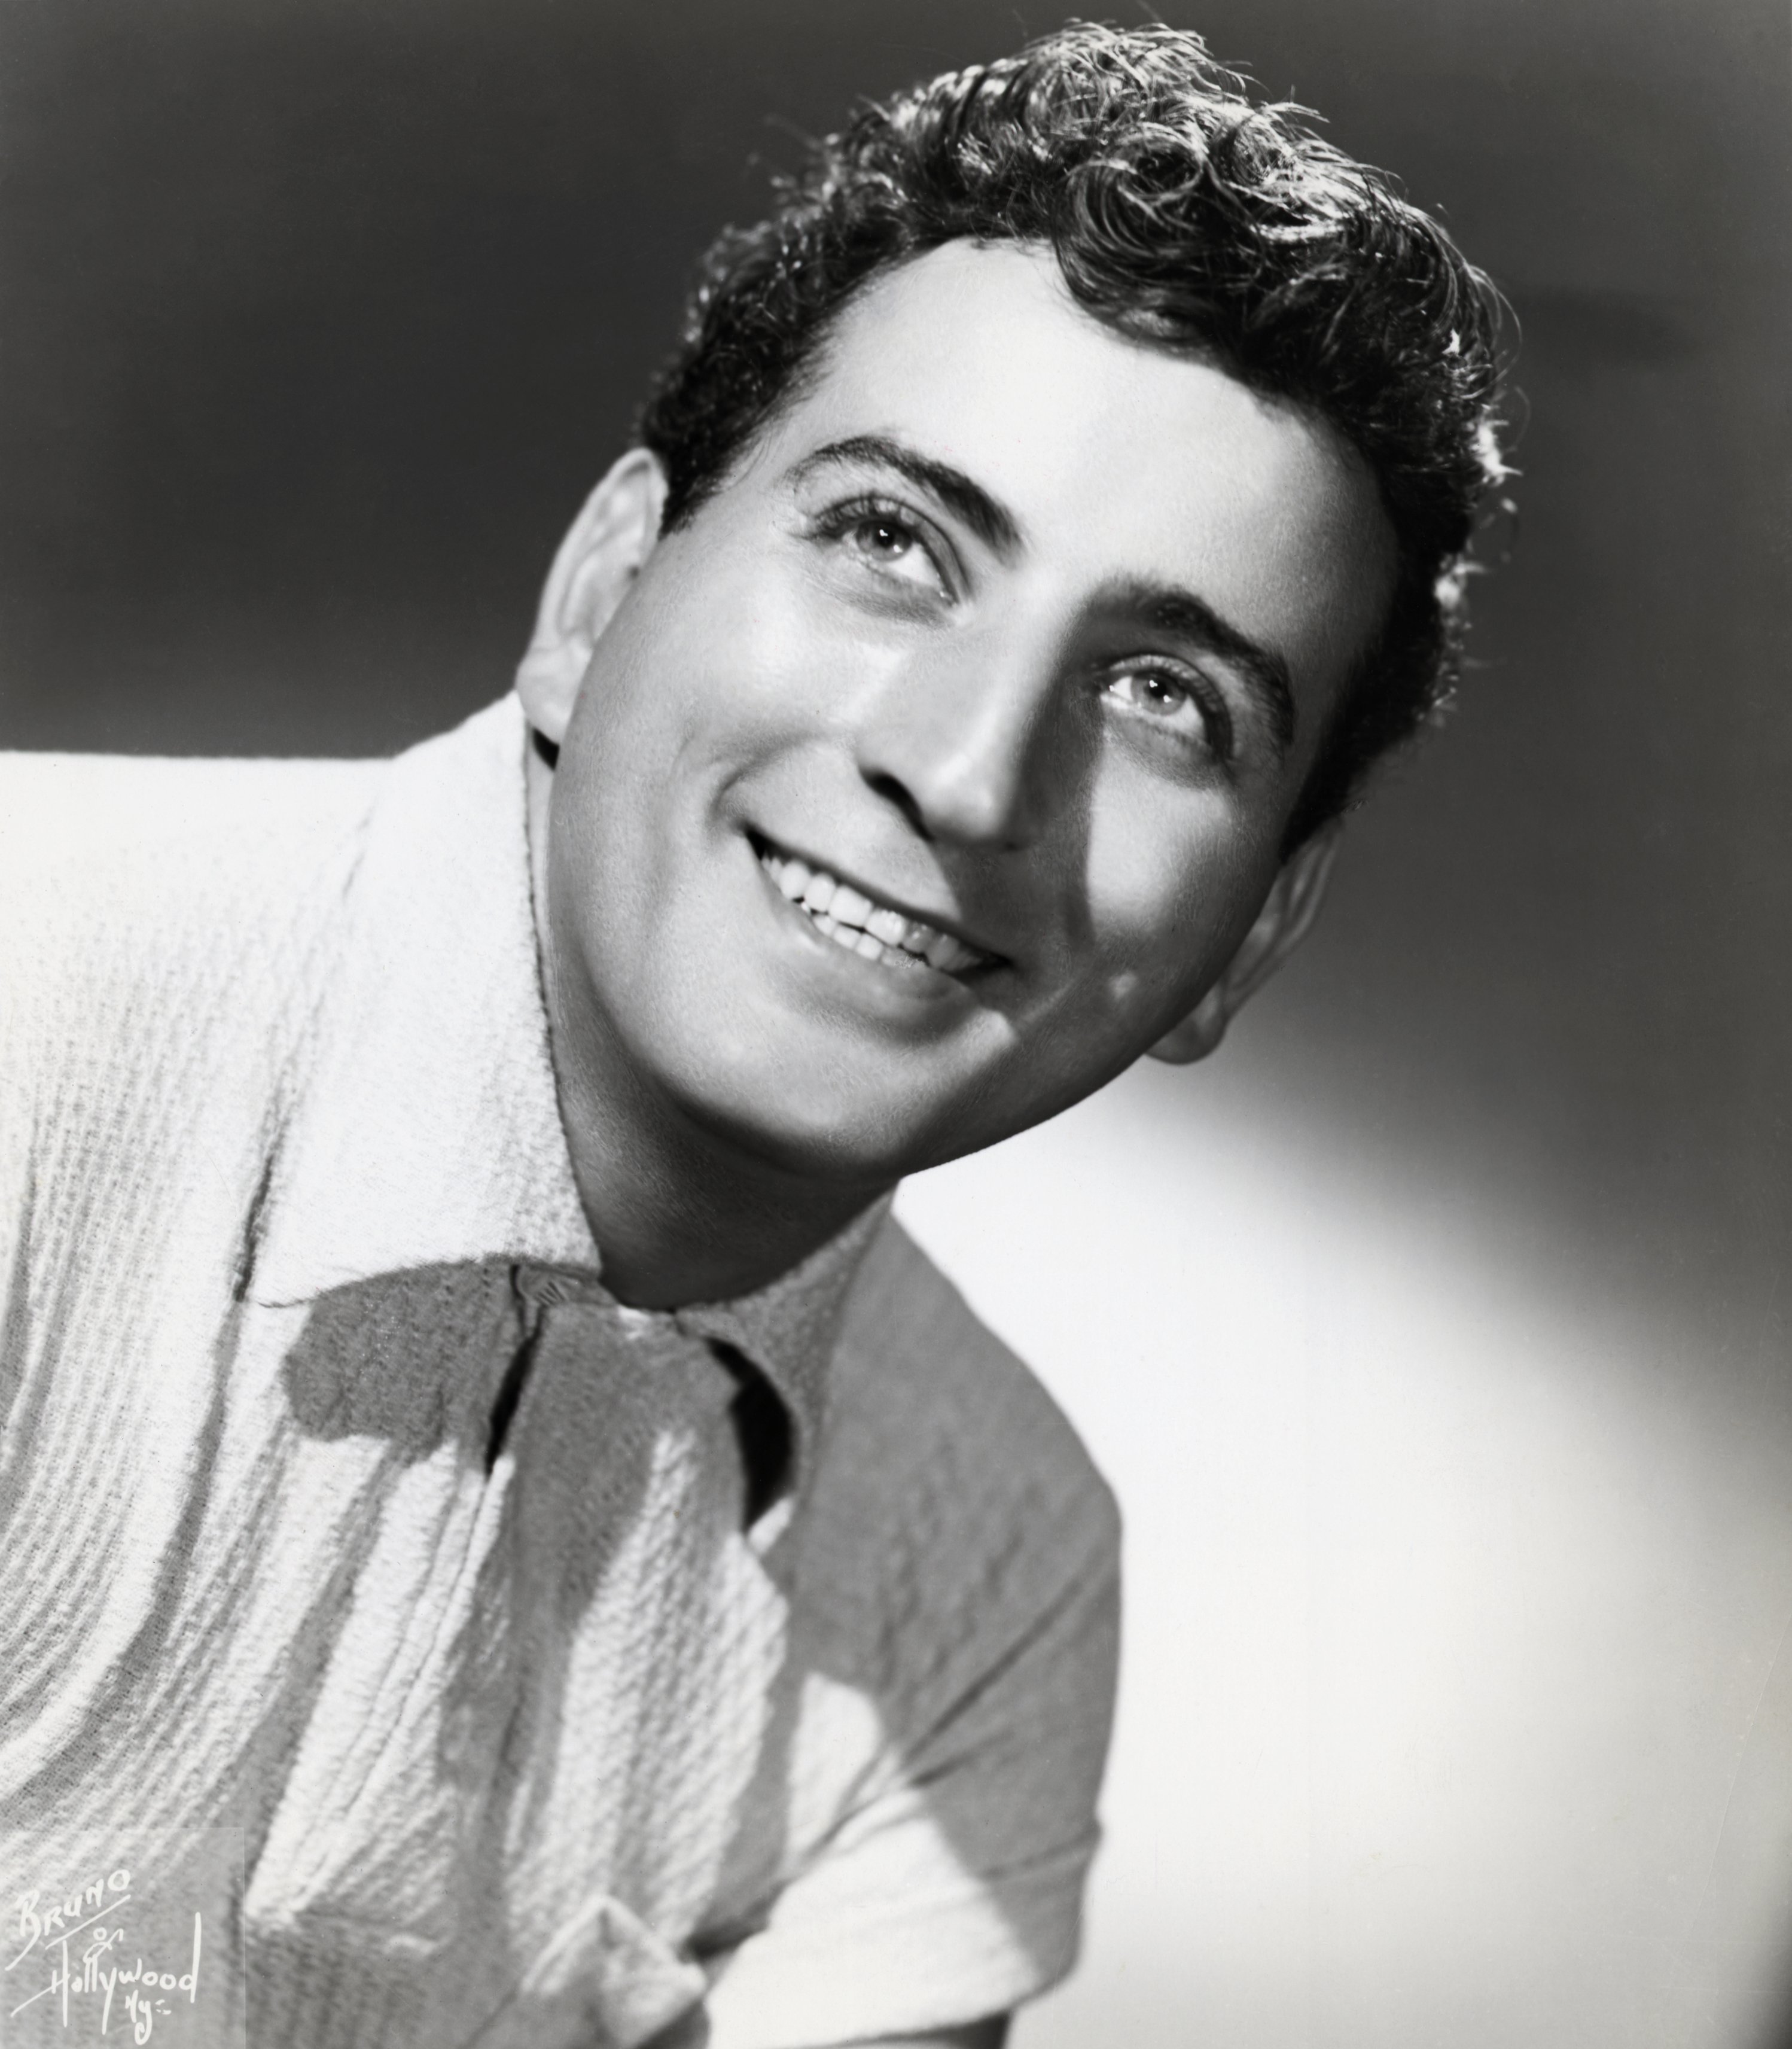 Tony Bennett as a teenager  | Source: Getty Images